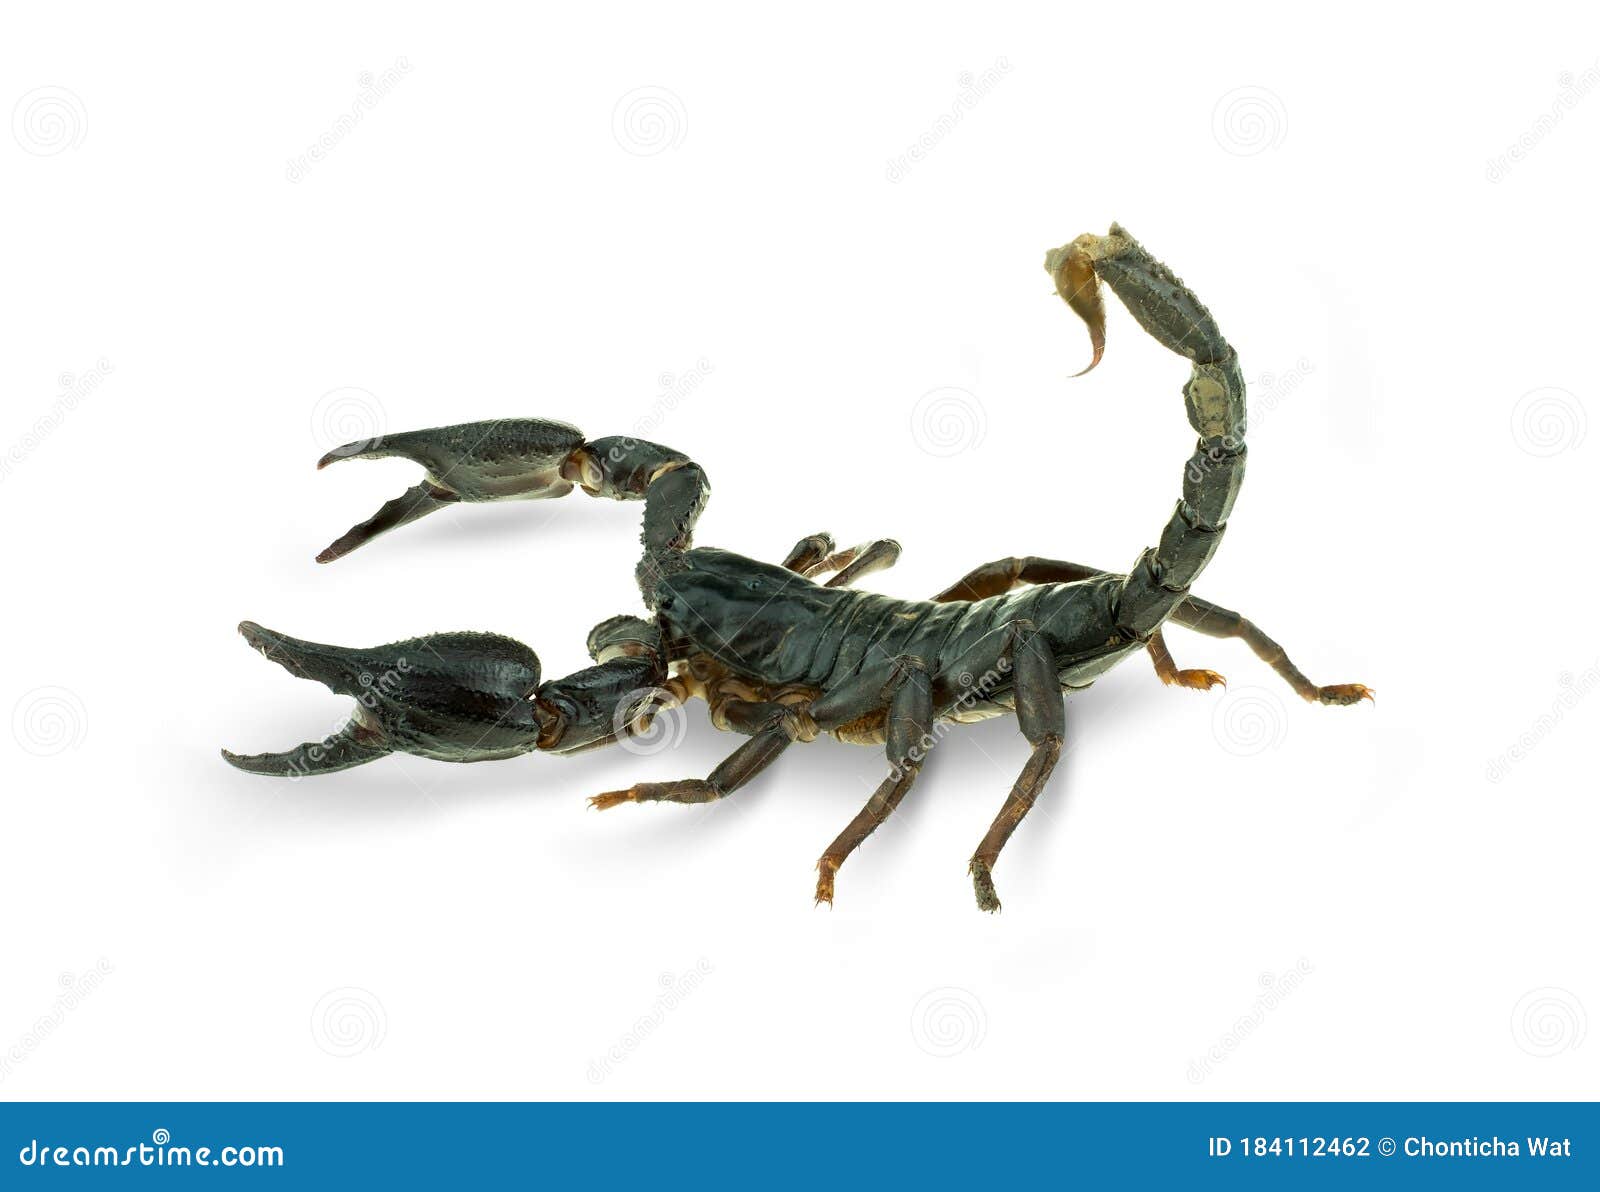 Giant forest scorpions stock photo. Image of poison - 184112462